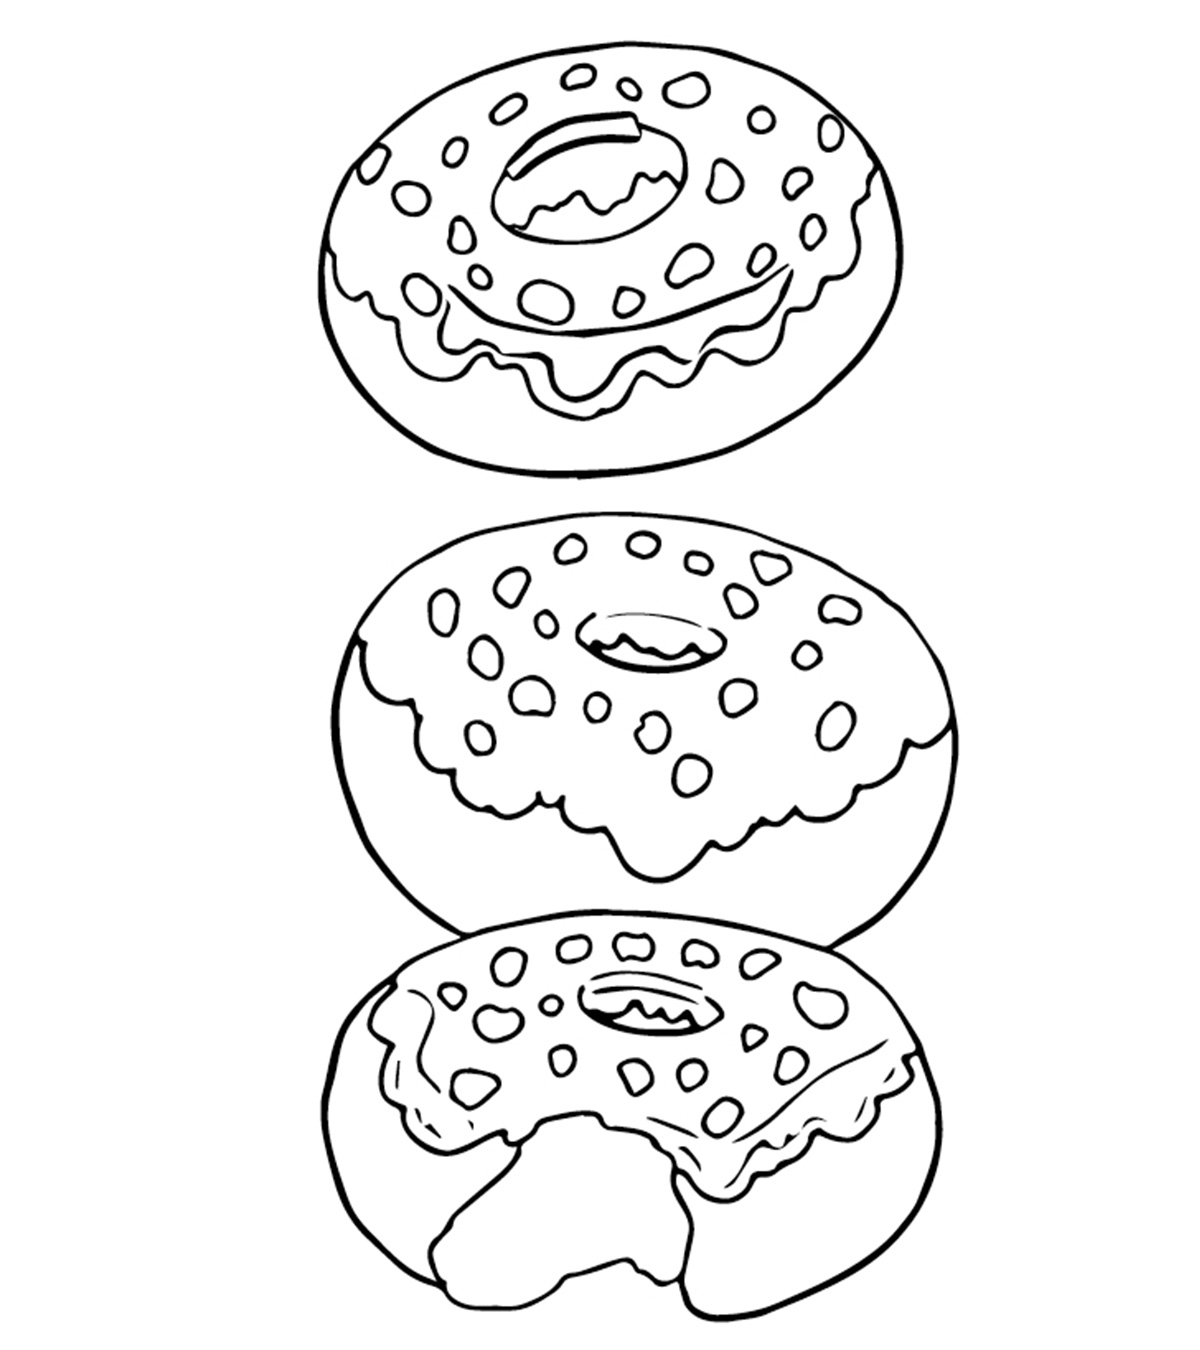 Top 10 Donut Coloring Pages For Your Toddler_image